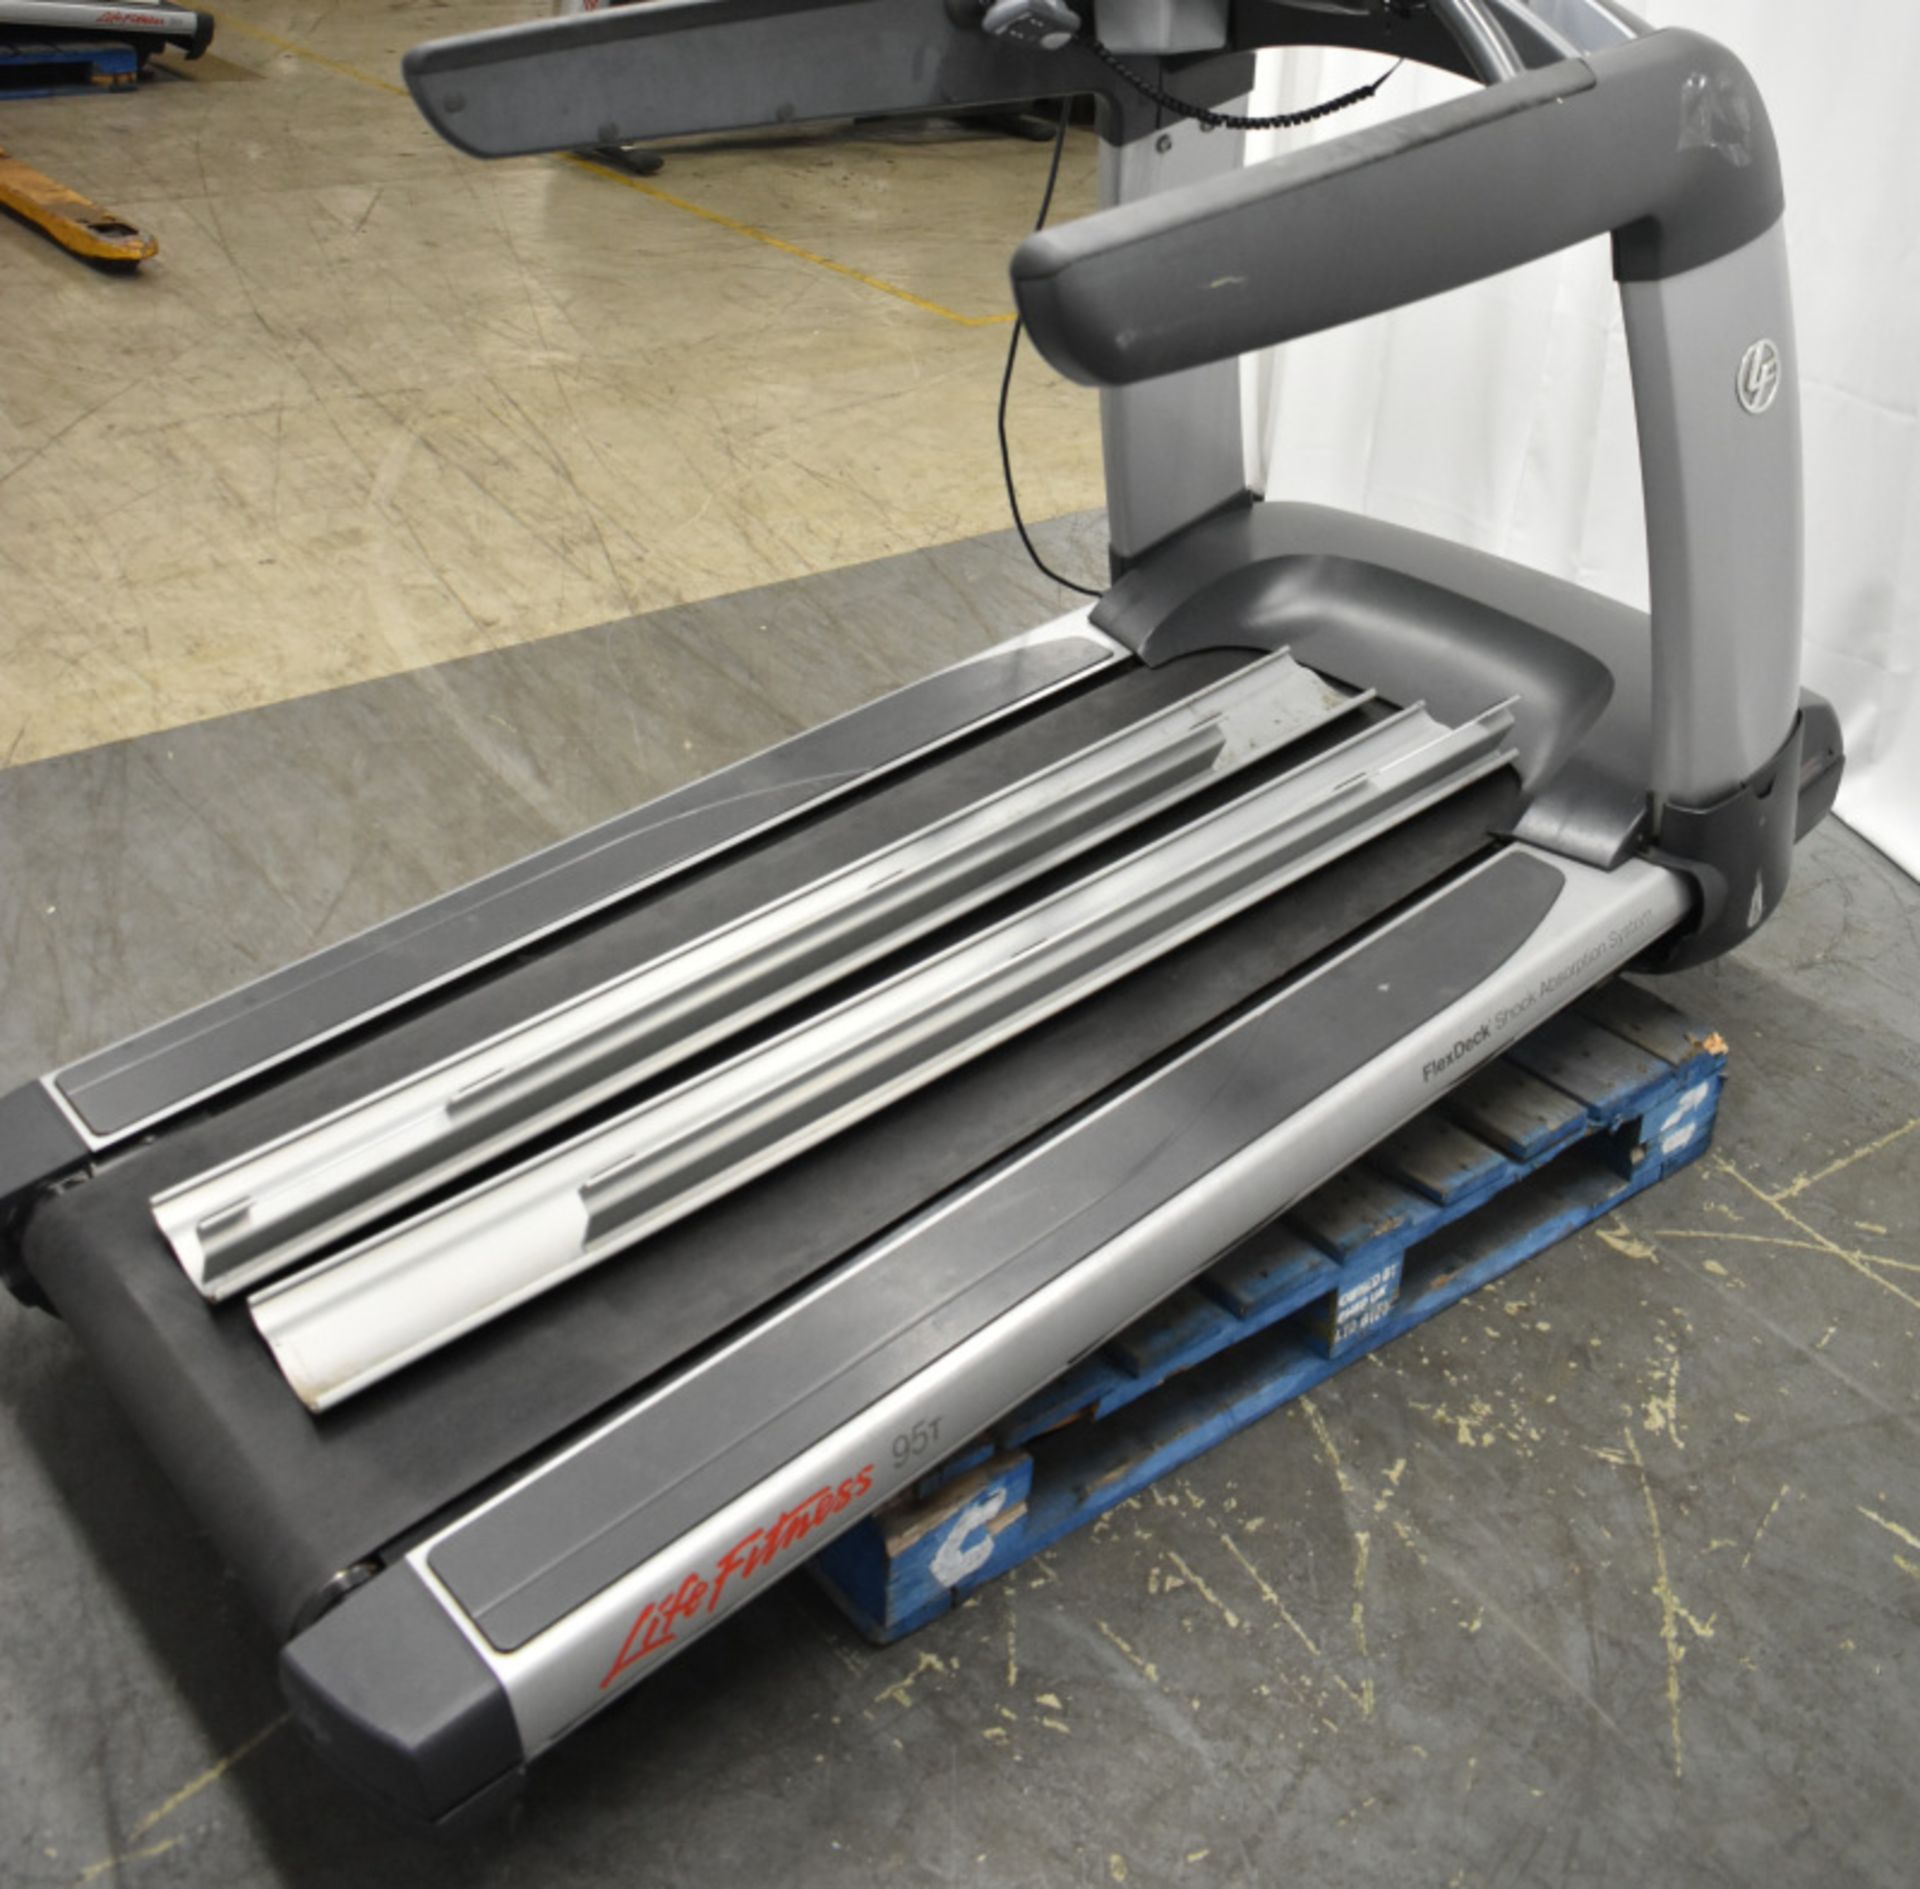 Life Fitness 95T FlexDeck Treadmill - Powers Up Functions Not Tested - Image 6 of 18